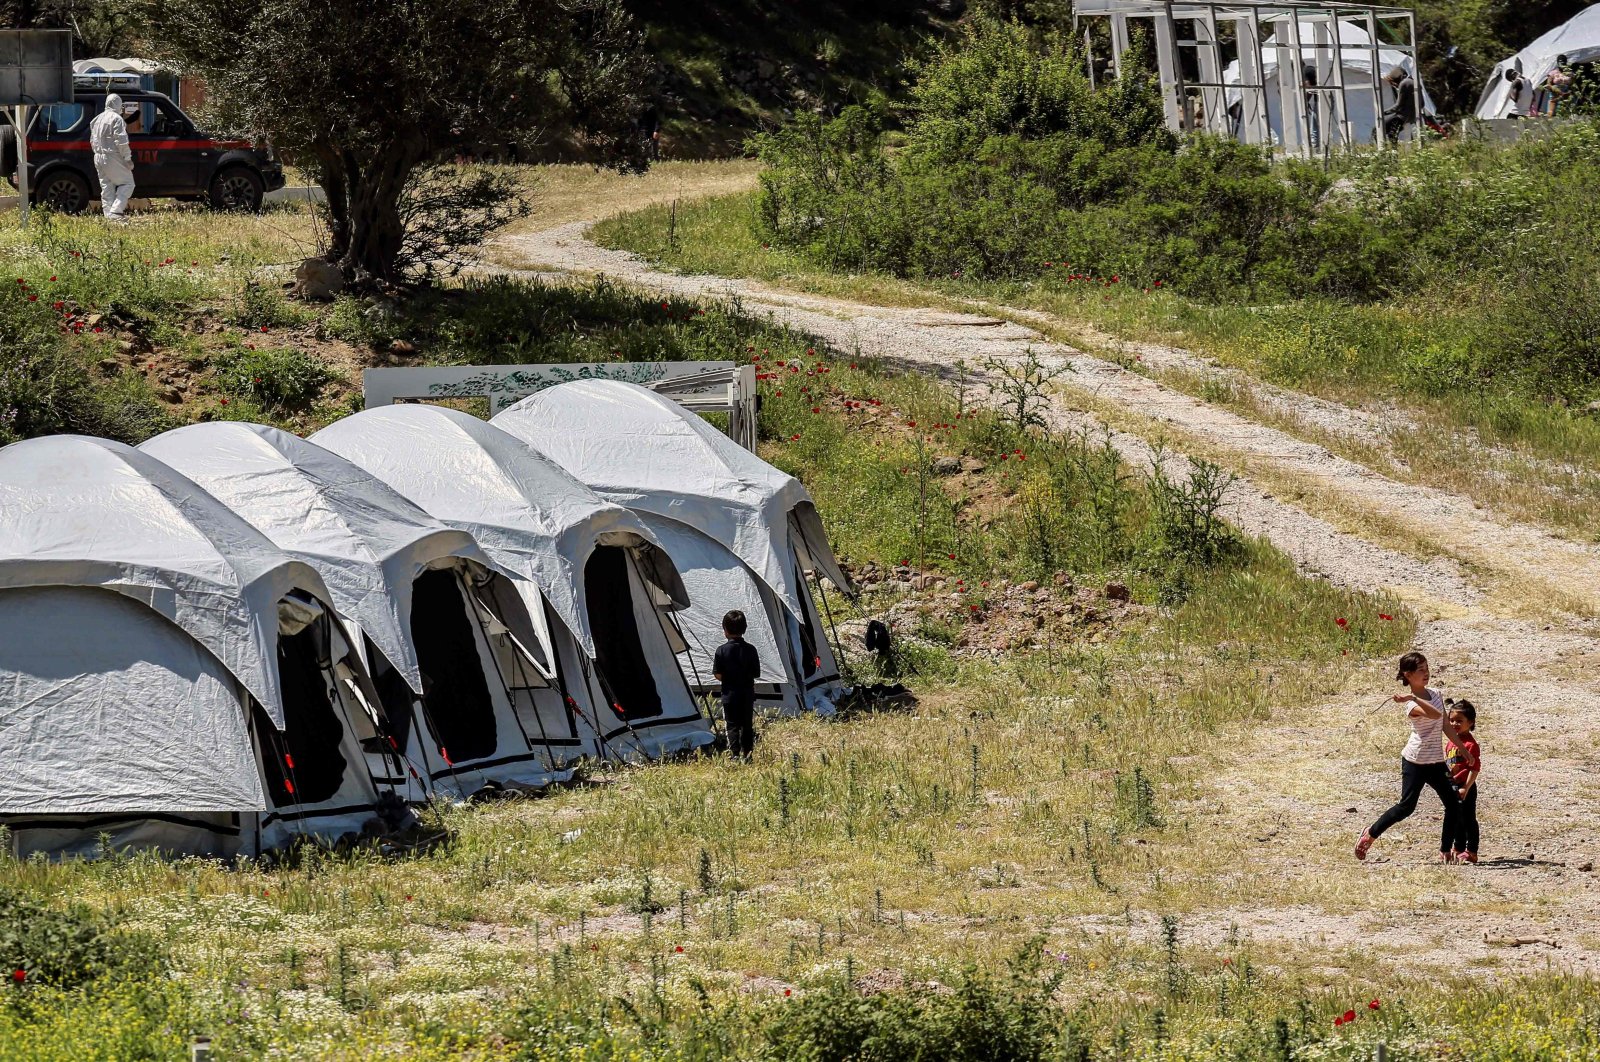 Children play outside the tents at a migrant and refugee camp where cases of COVID-19 were detected, on the Greek island of Lesbos, on May 13, 2020, as the country faces the novel coronavirus pandemic. (AFP Photo)